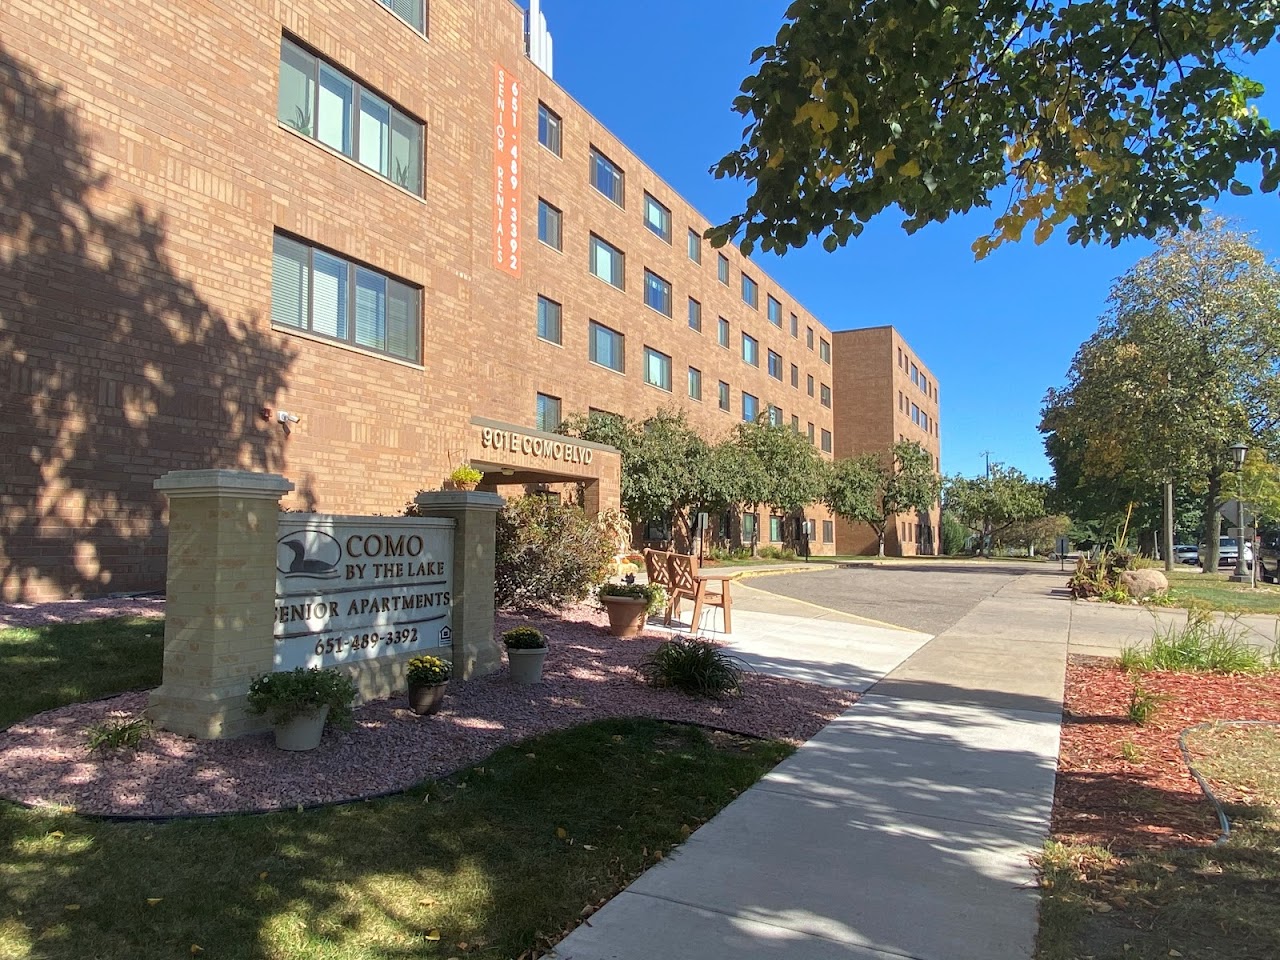 Photo of COMO BY THE LAKE. Affordable housing located at 901 EAST COMO BLVD SAINT PAUL, MN 55103